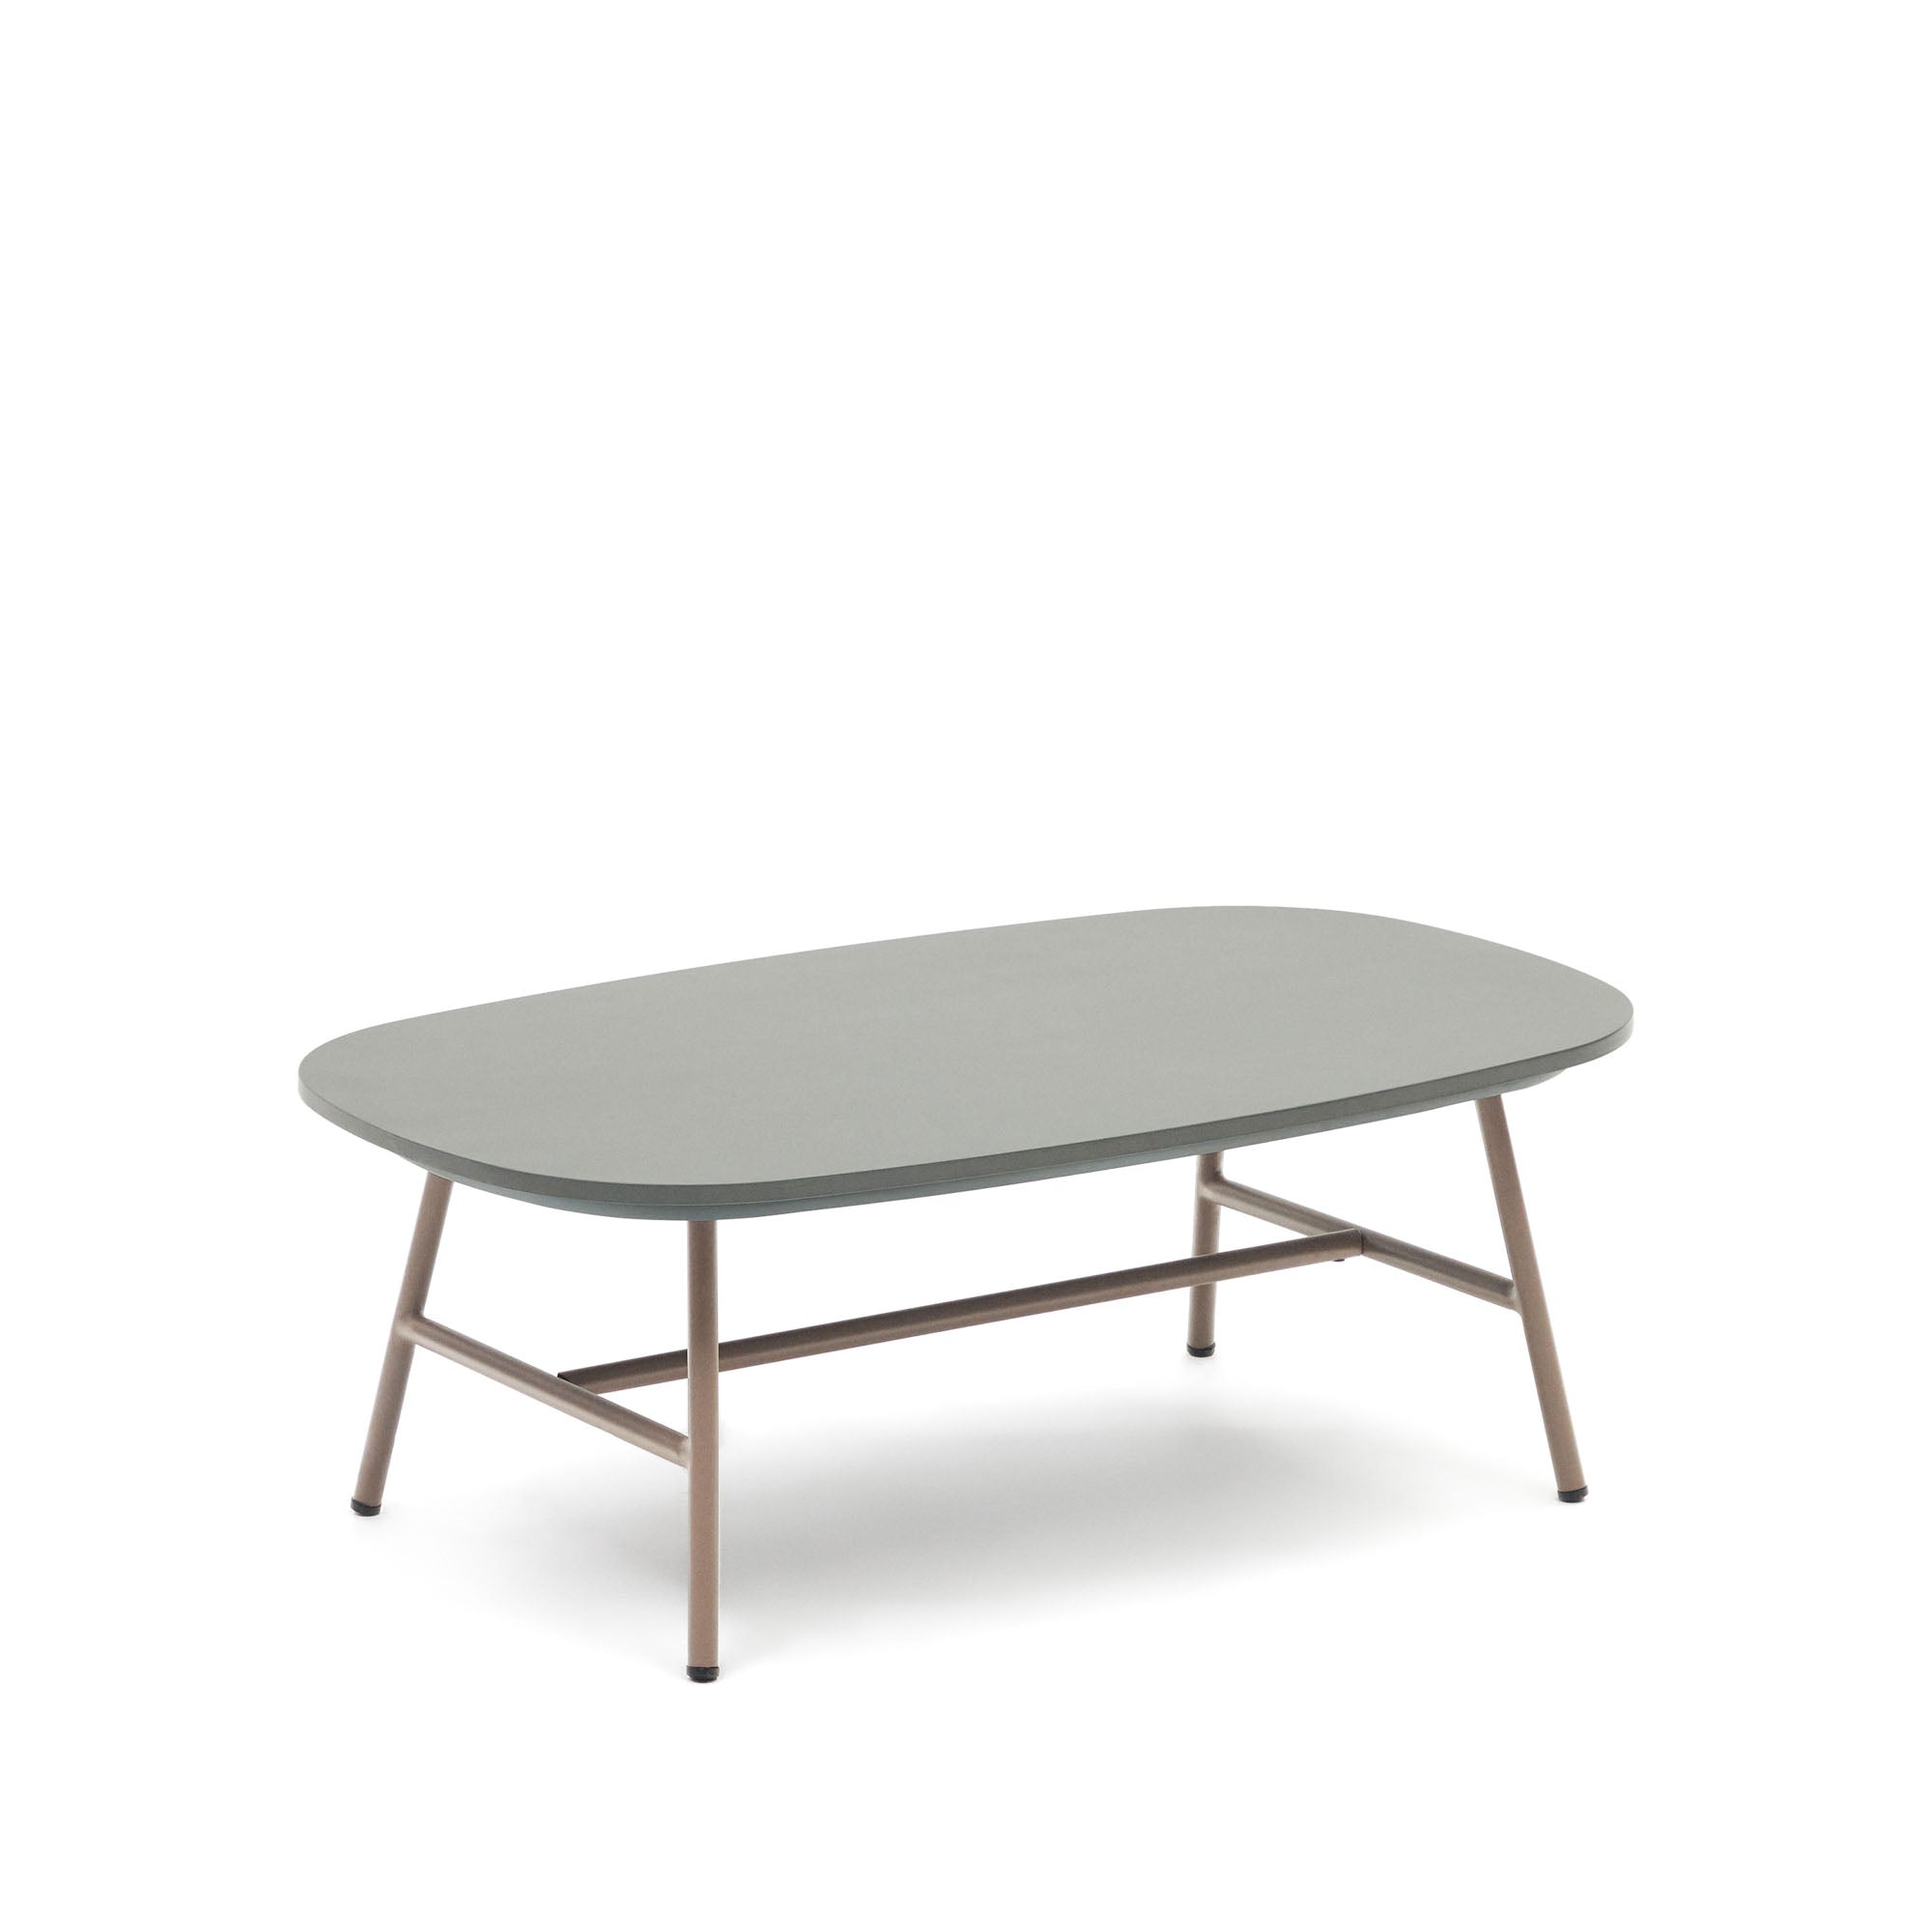 Bramant steel coffee table with mauve finish, 60 x 60 cm